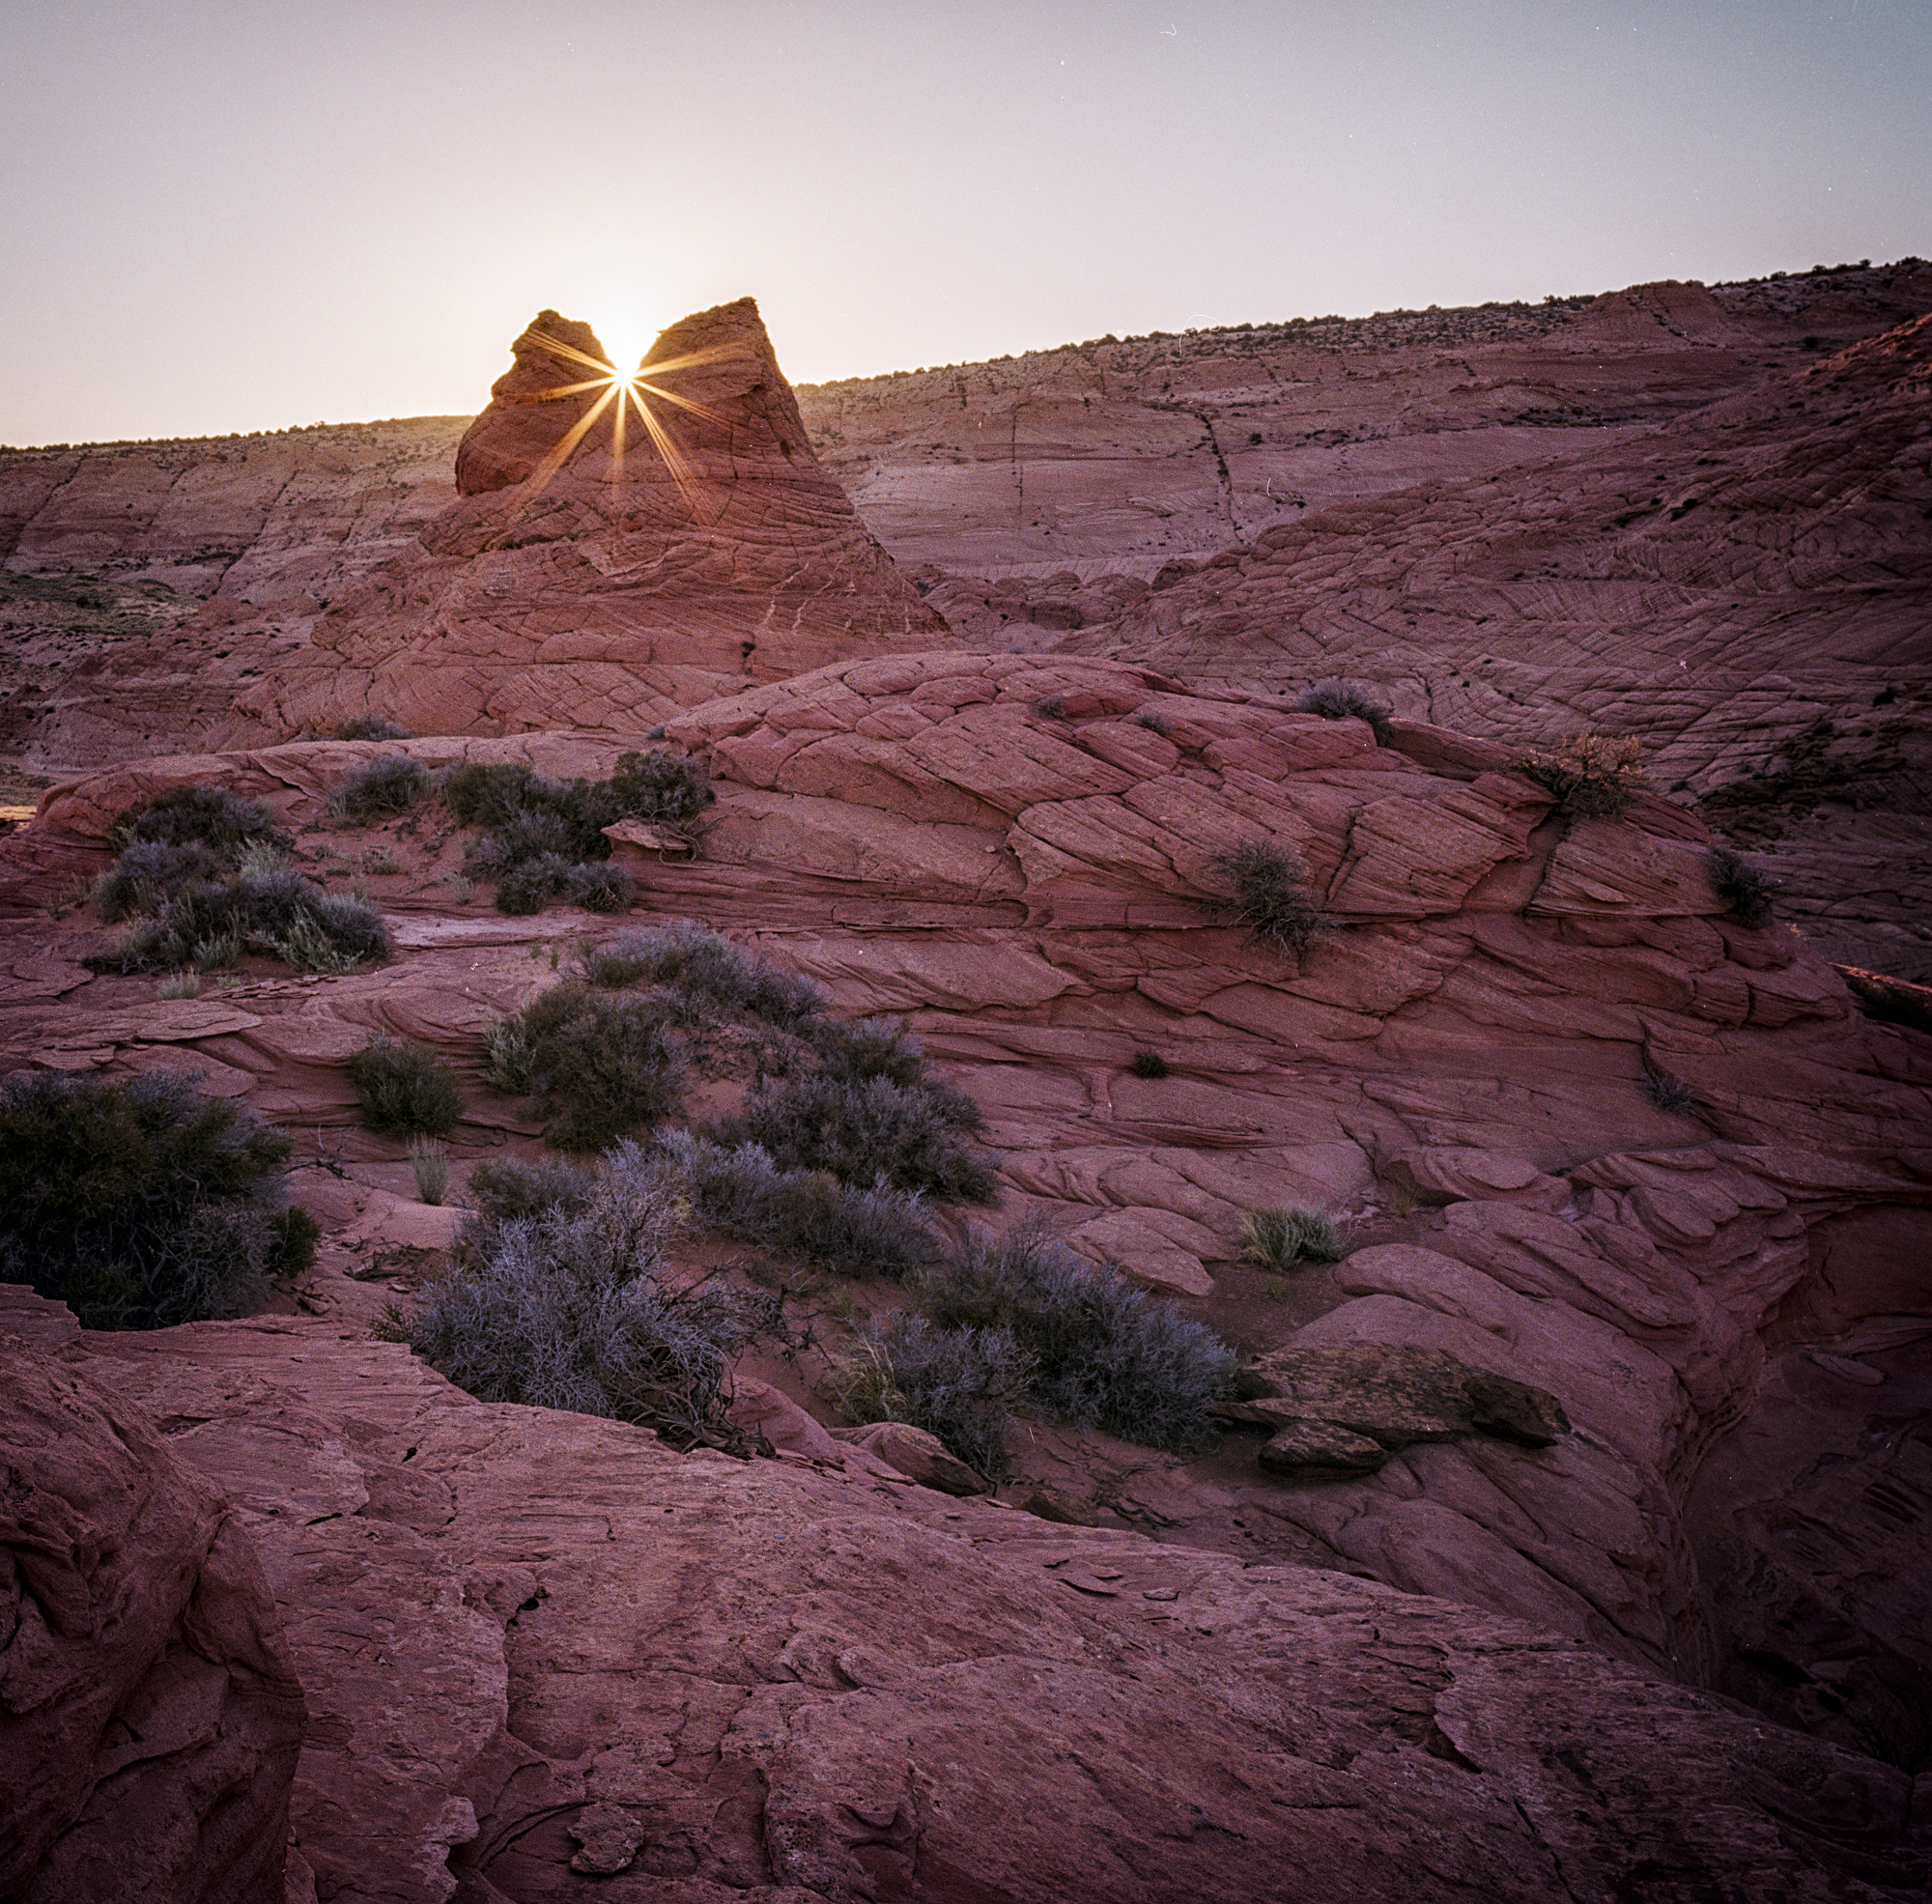 Buckskin Gulch, Utah. I had to move around a bit in order to follow the sun as it rose in order to get it smack dab in the center of the crook in the rock. Again, timing was all important as I had just a few seconds to get it.